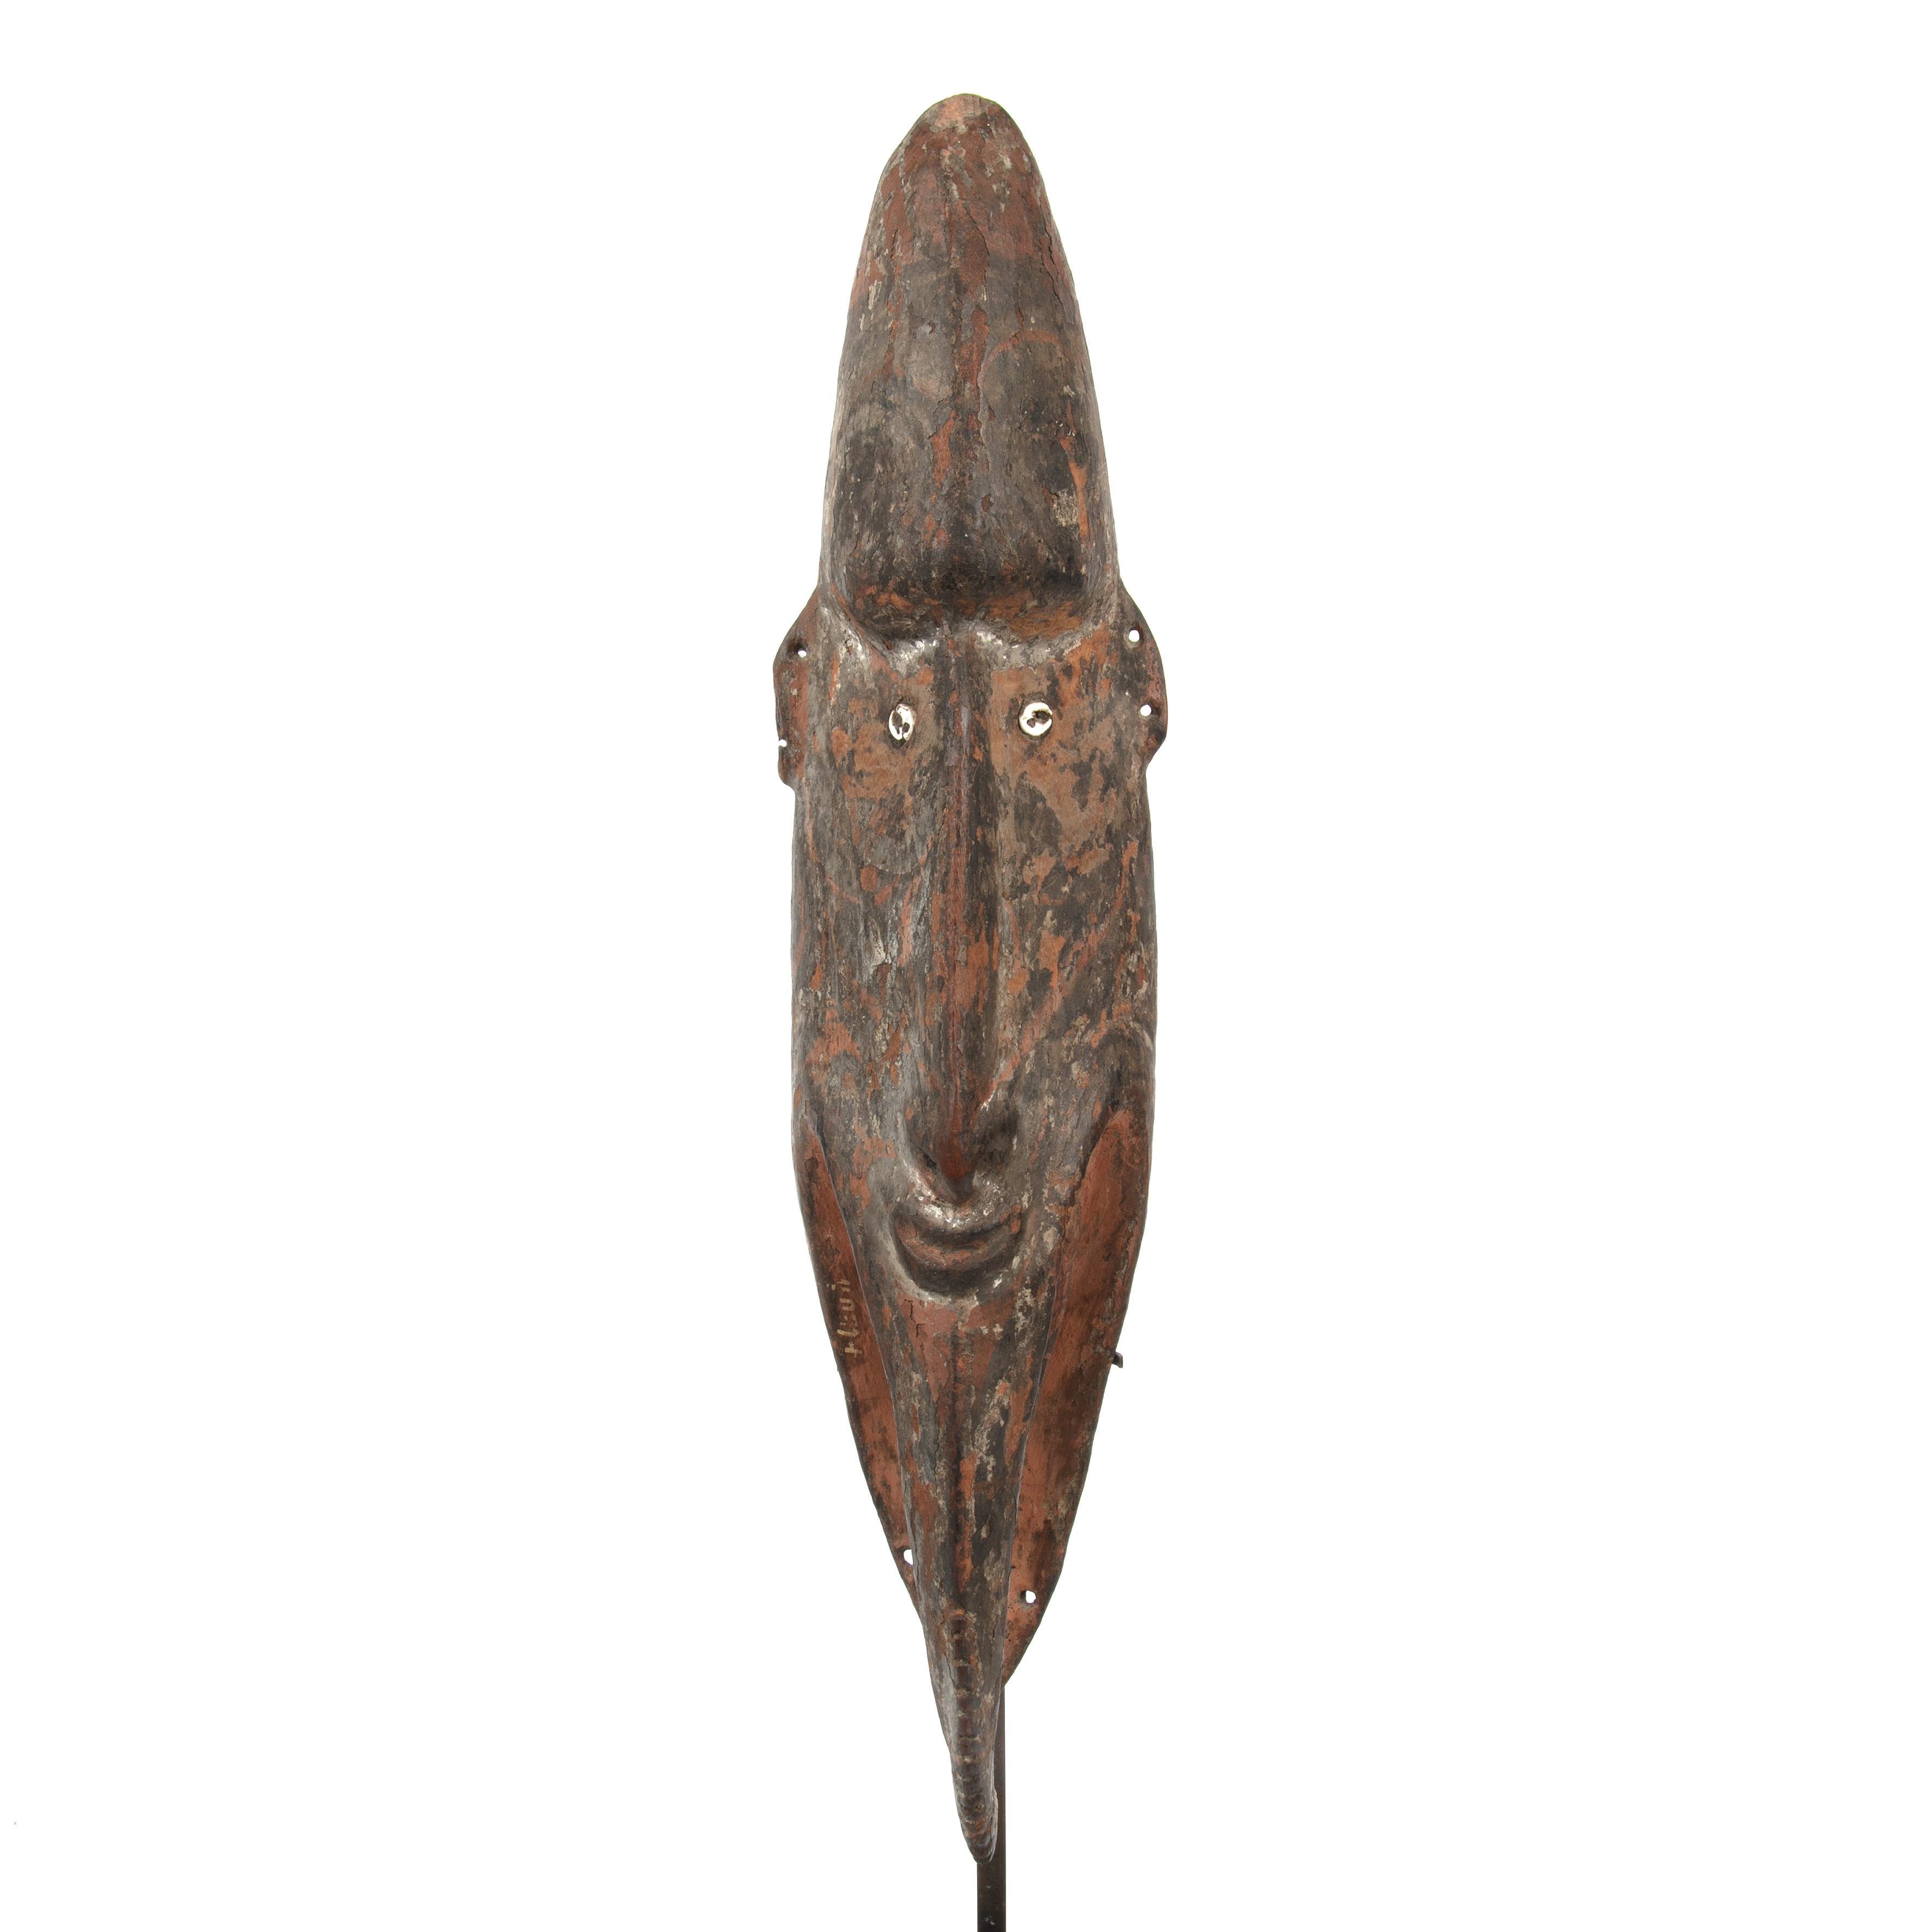 A late 19th/early 20th century Sepik river, Papua New Guinea, carved and painted wood Mai mask